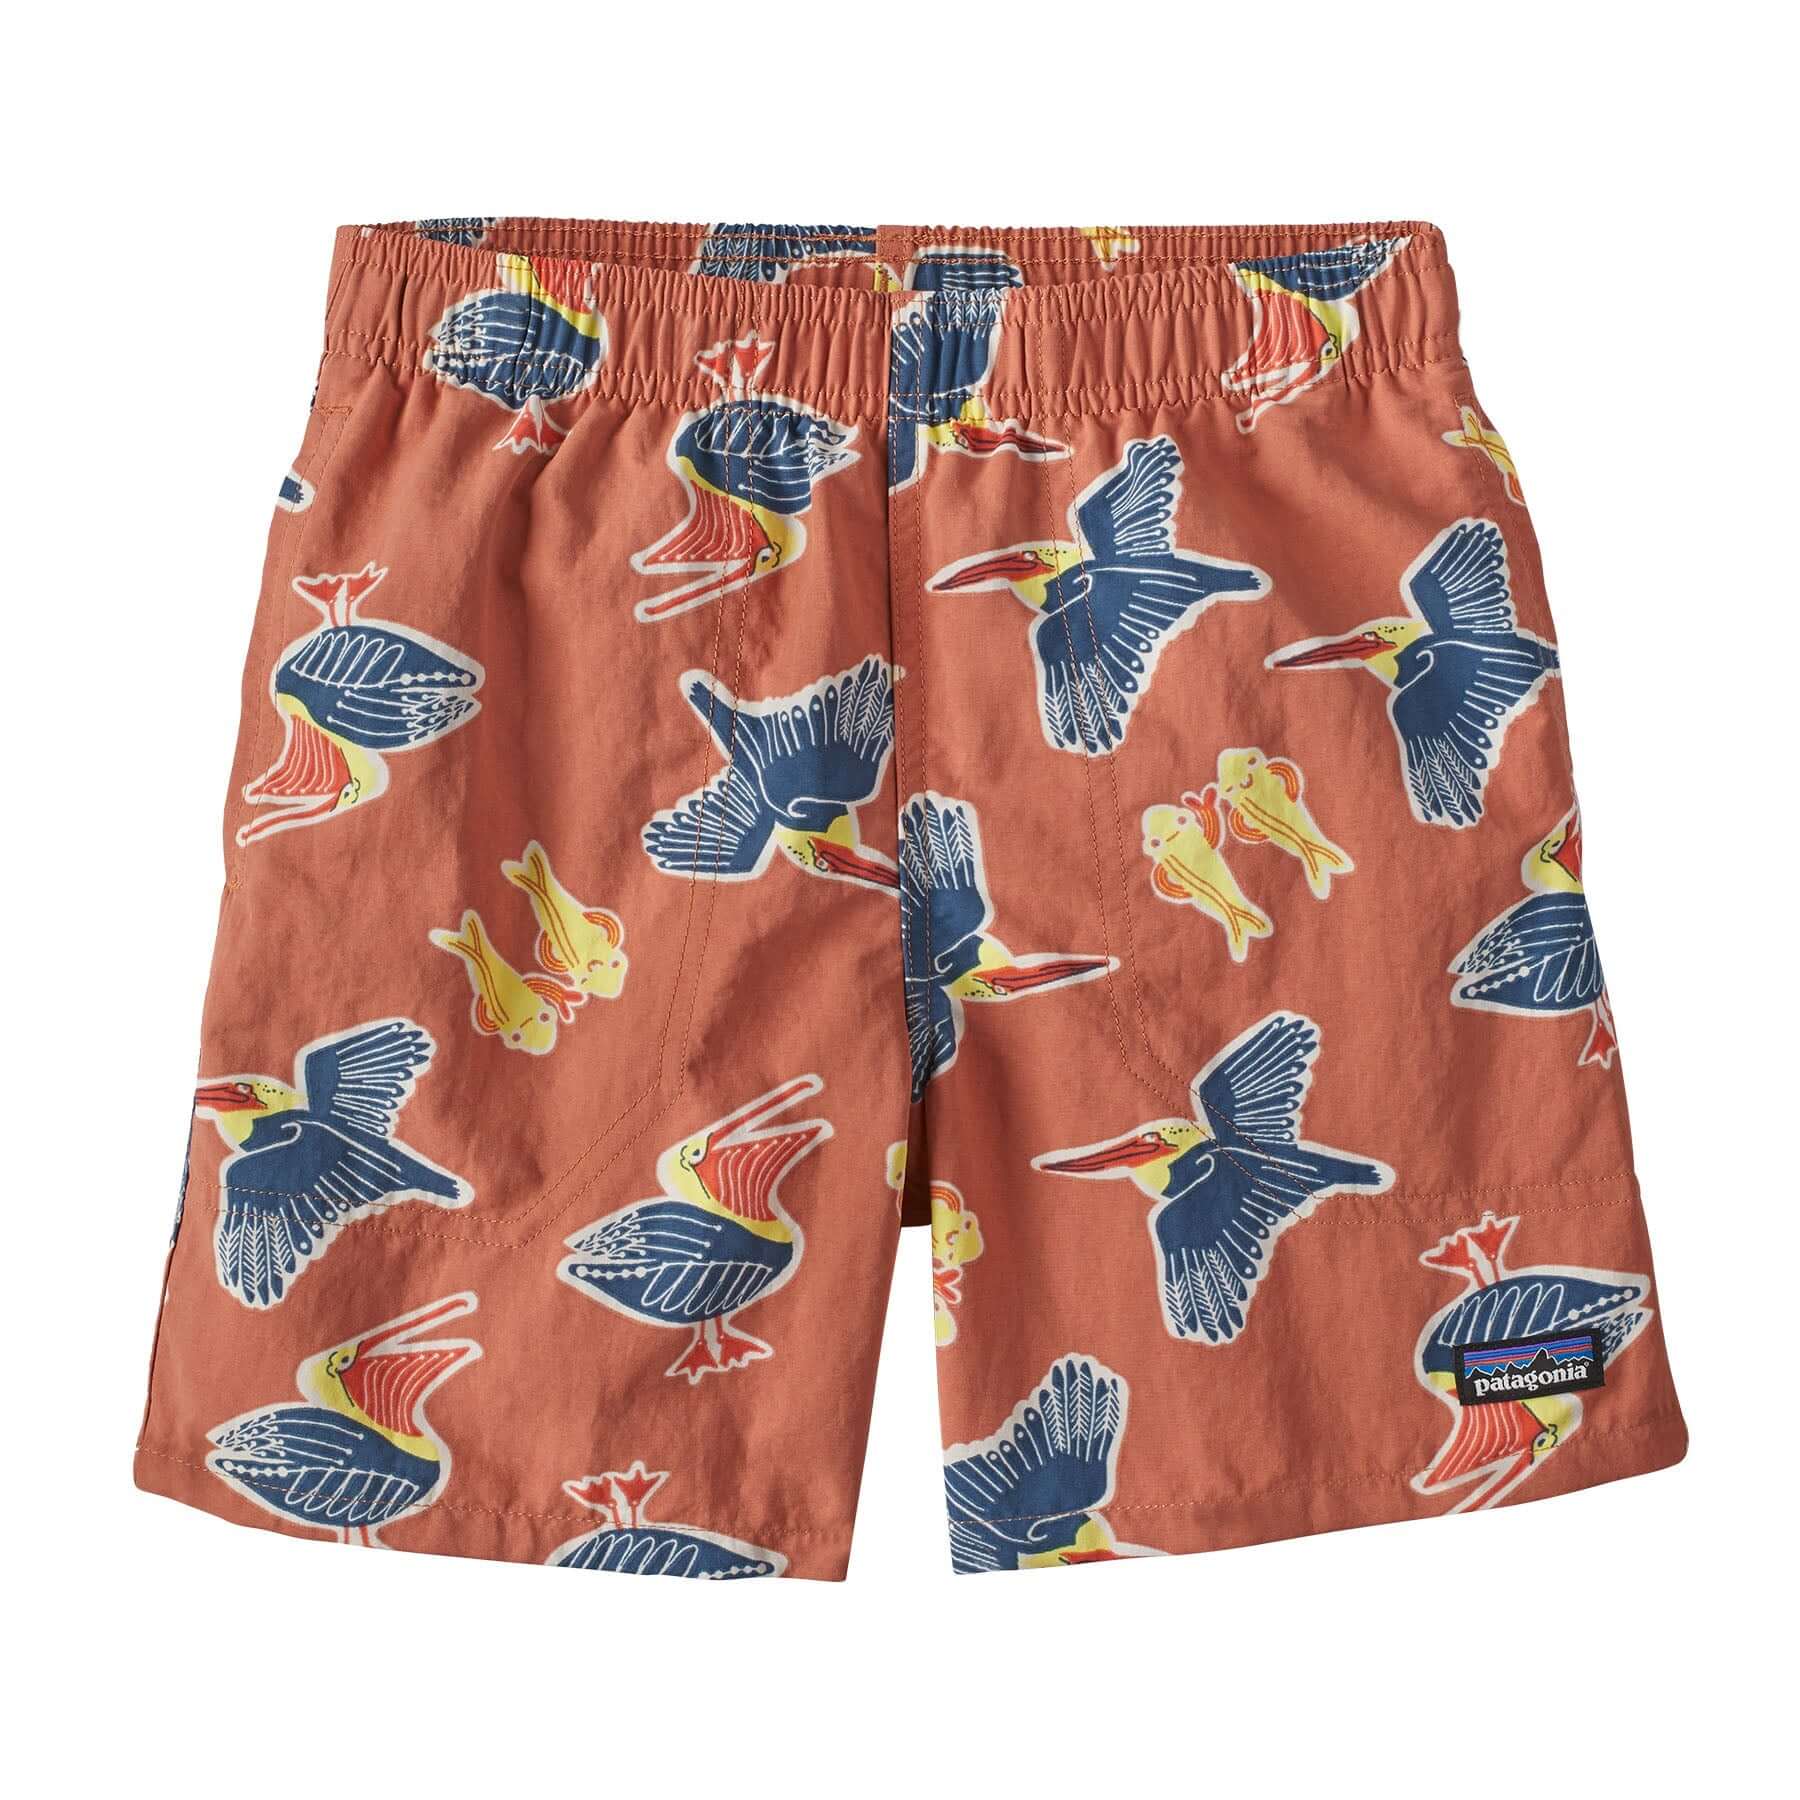 Kids' Baggies Shorts 5 in. - Lined in Amigos: Sienna Clay | Patagonia Bend